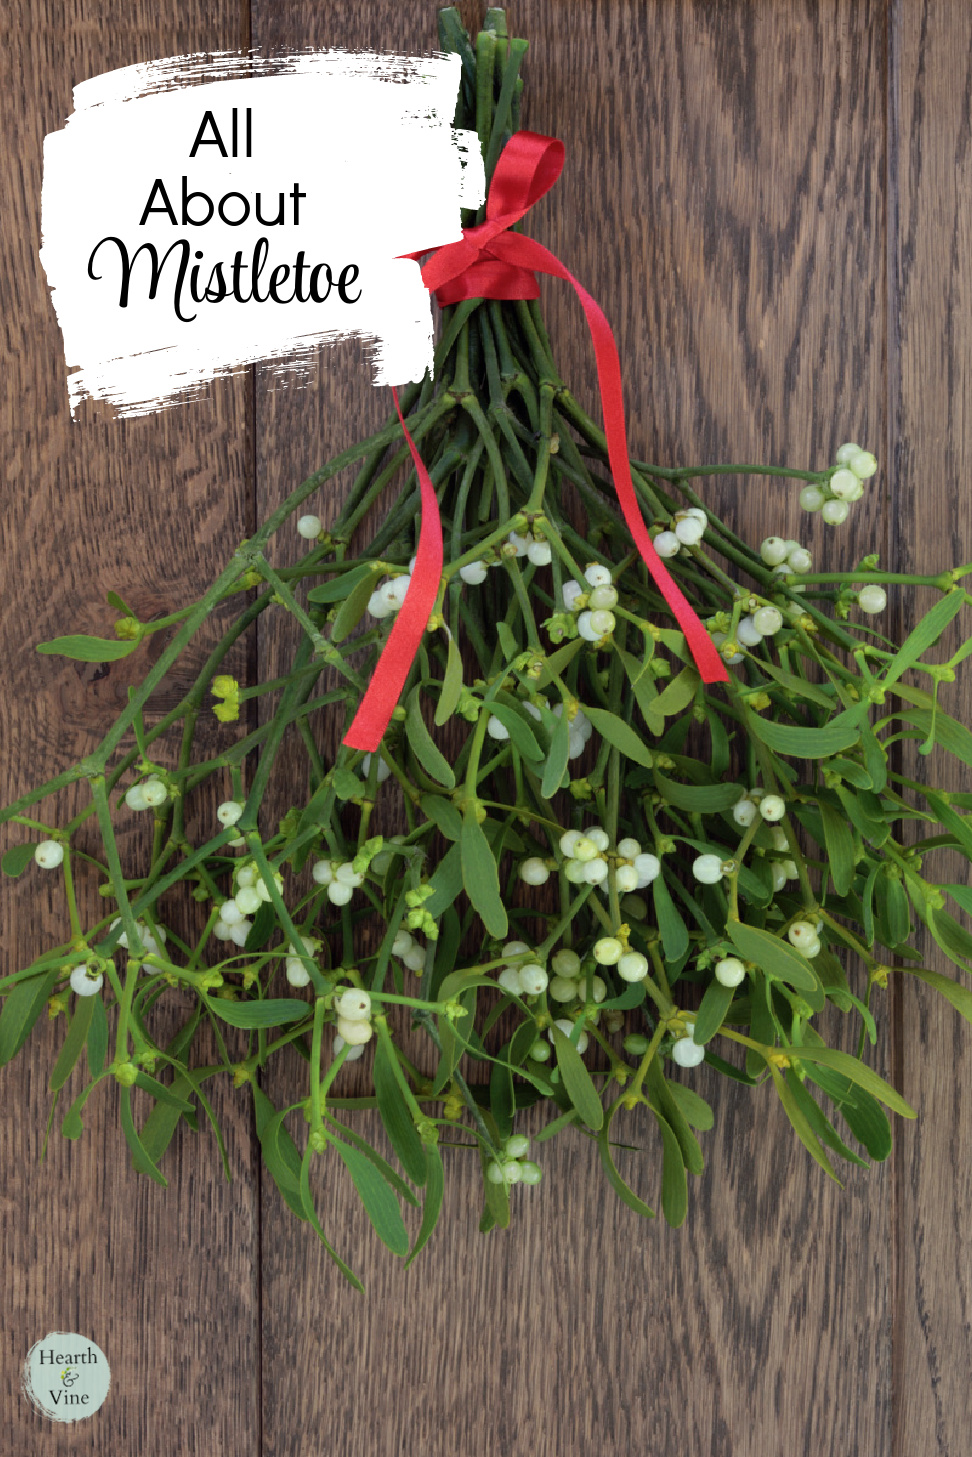 A bunch of mistletoe with berries tied with a red bow.